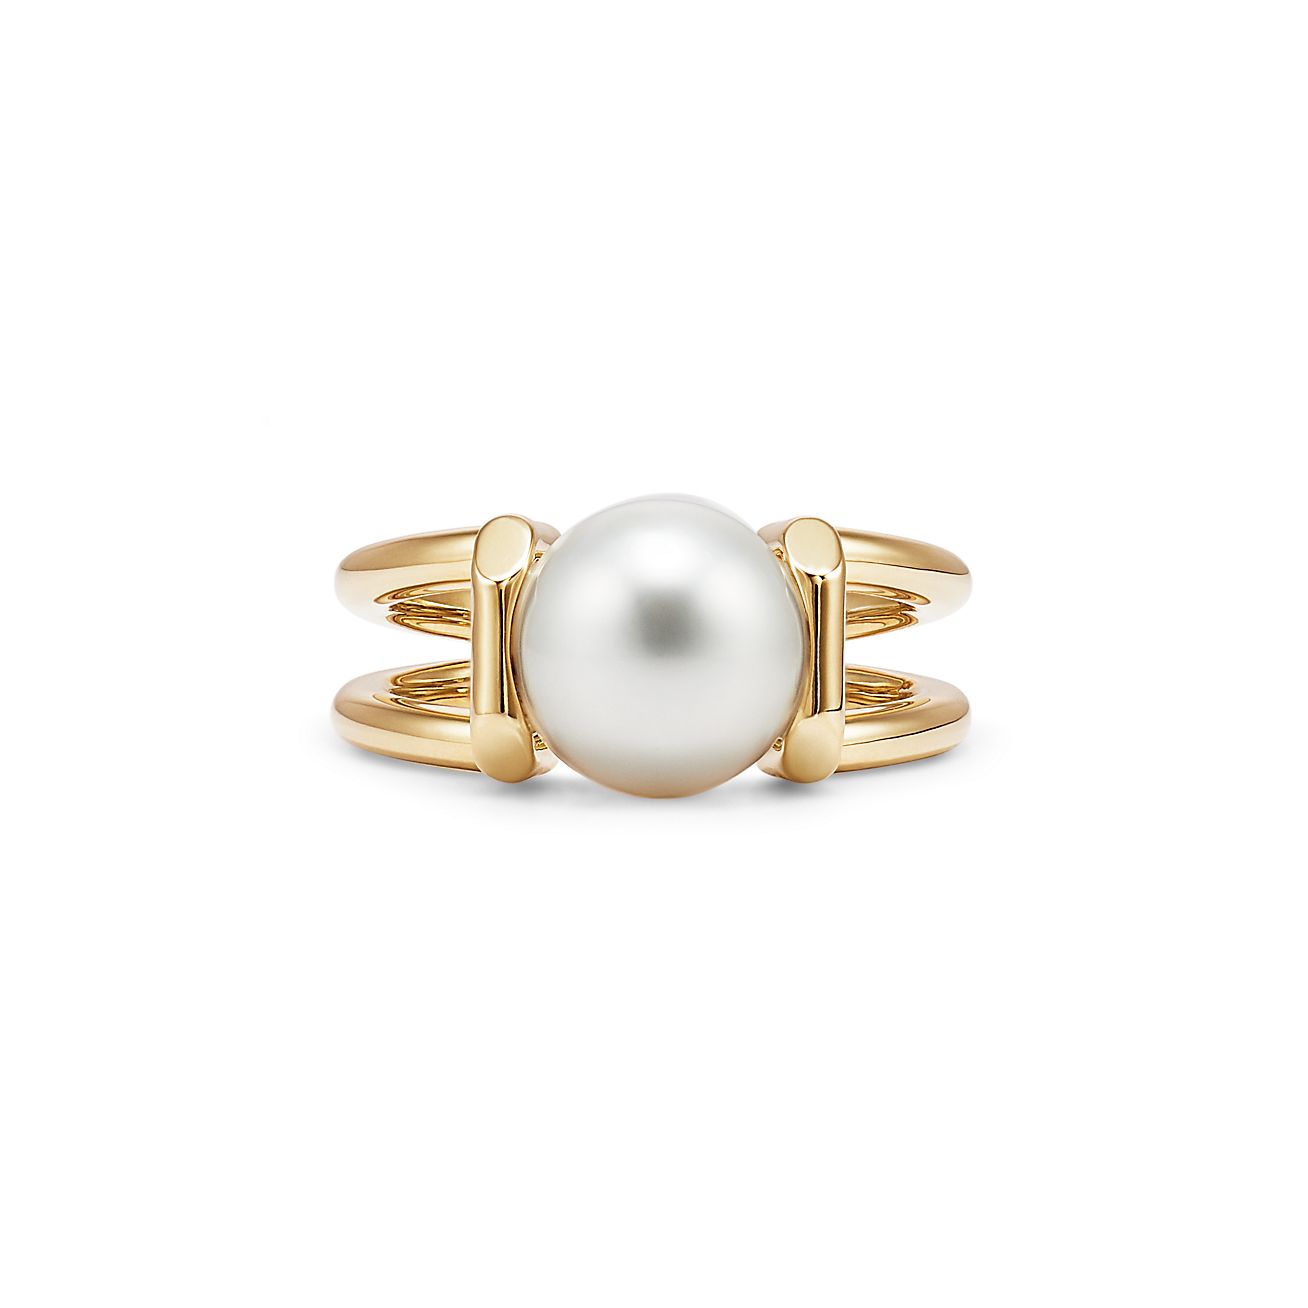 South Sea pearl ring Wedding ring Engagement ring White pearl  ring Pearl Ring One of a Kind Women/'s ring Women/'s Jewelry